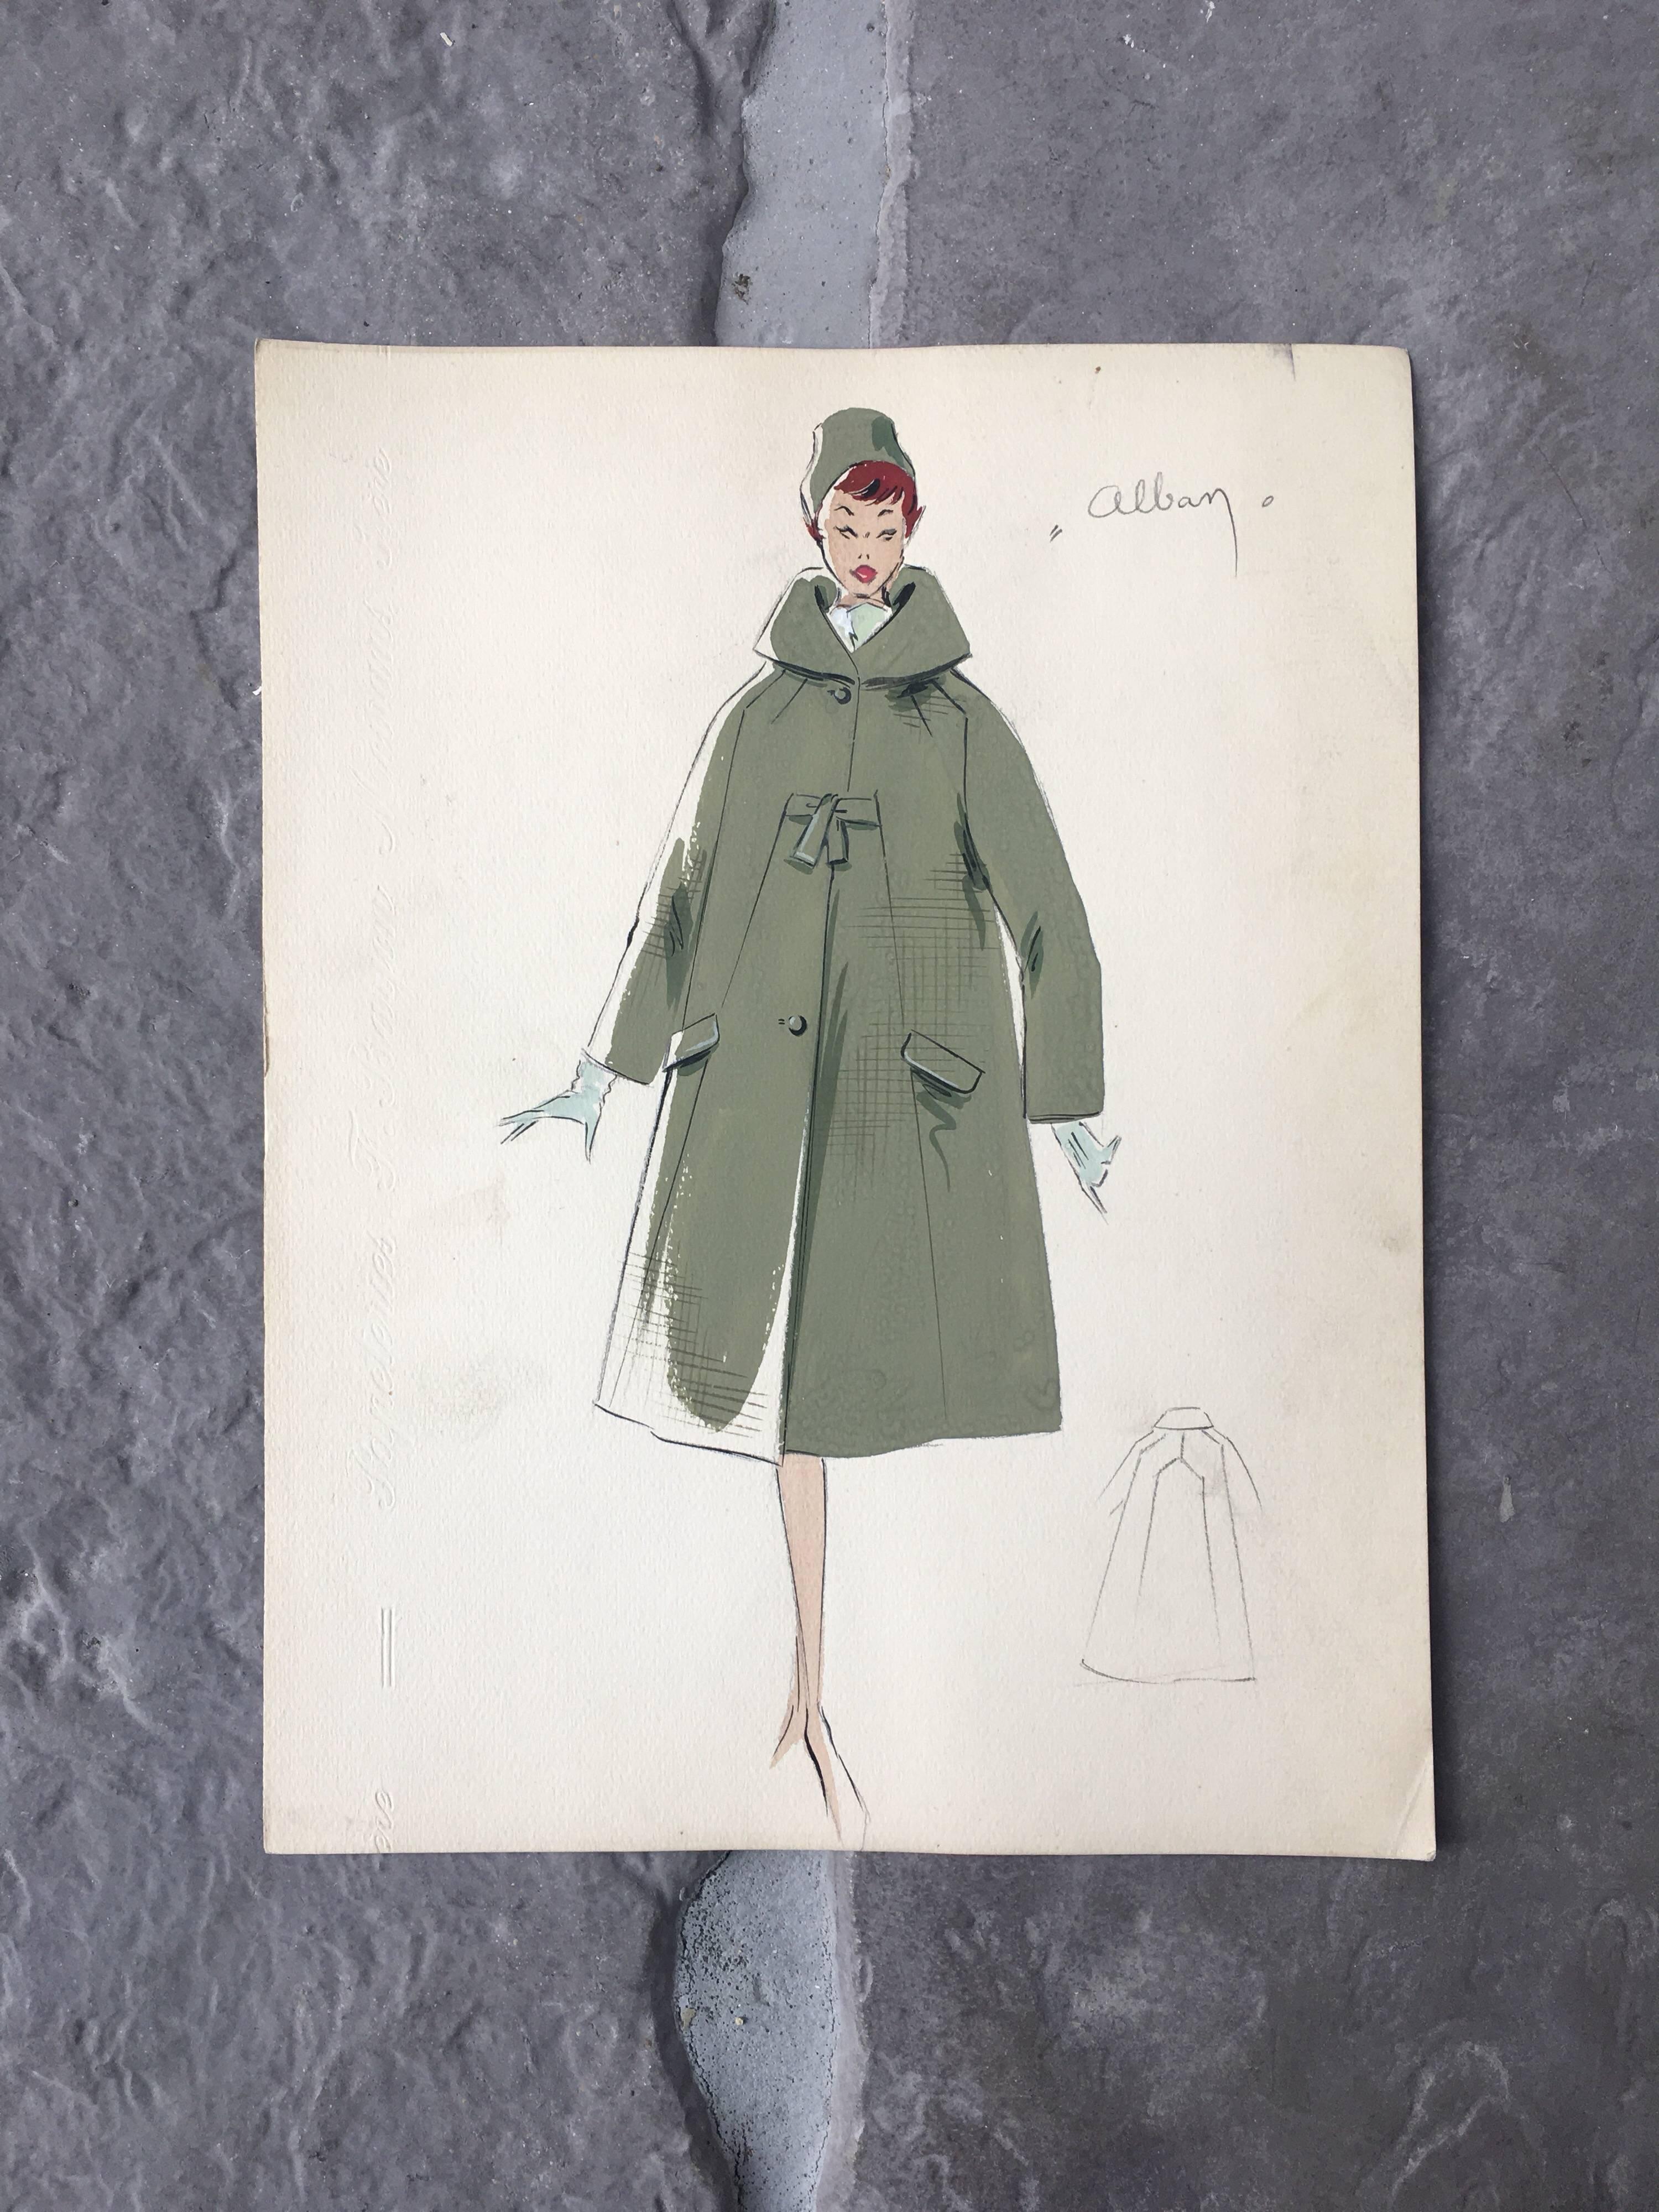 Lady in 1950's Green Coat and Hat Parisian Fashion Illustration Sketch - Painting by Unknown